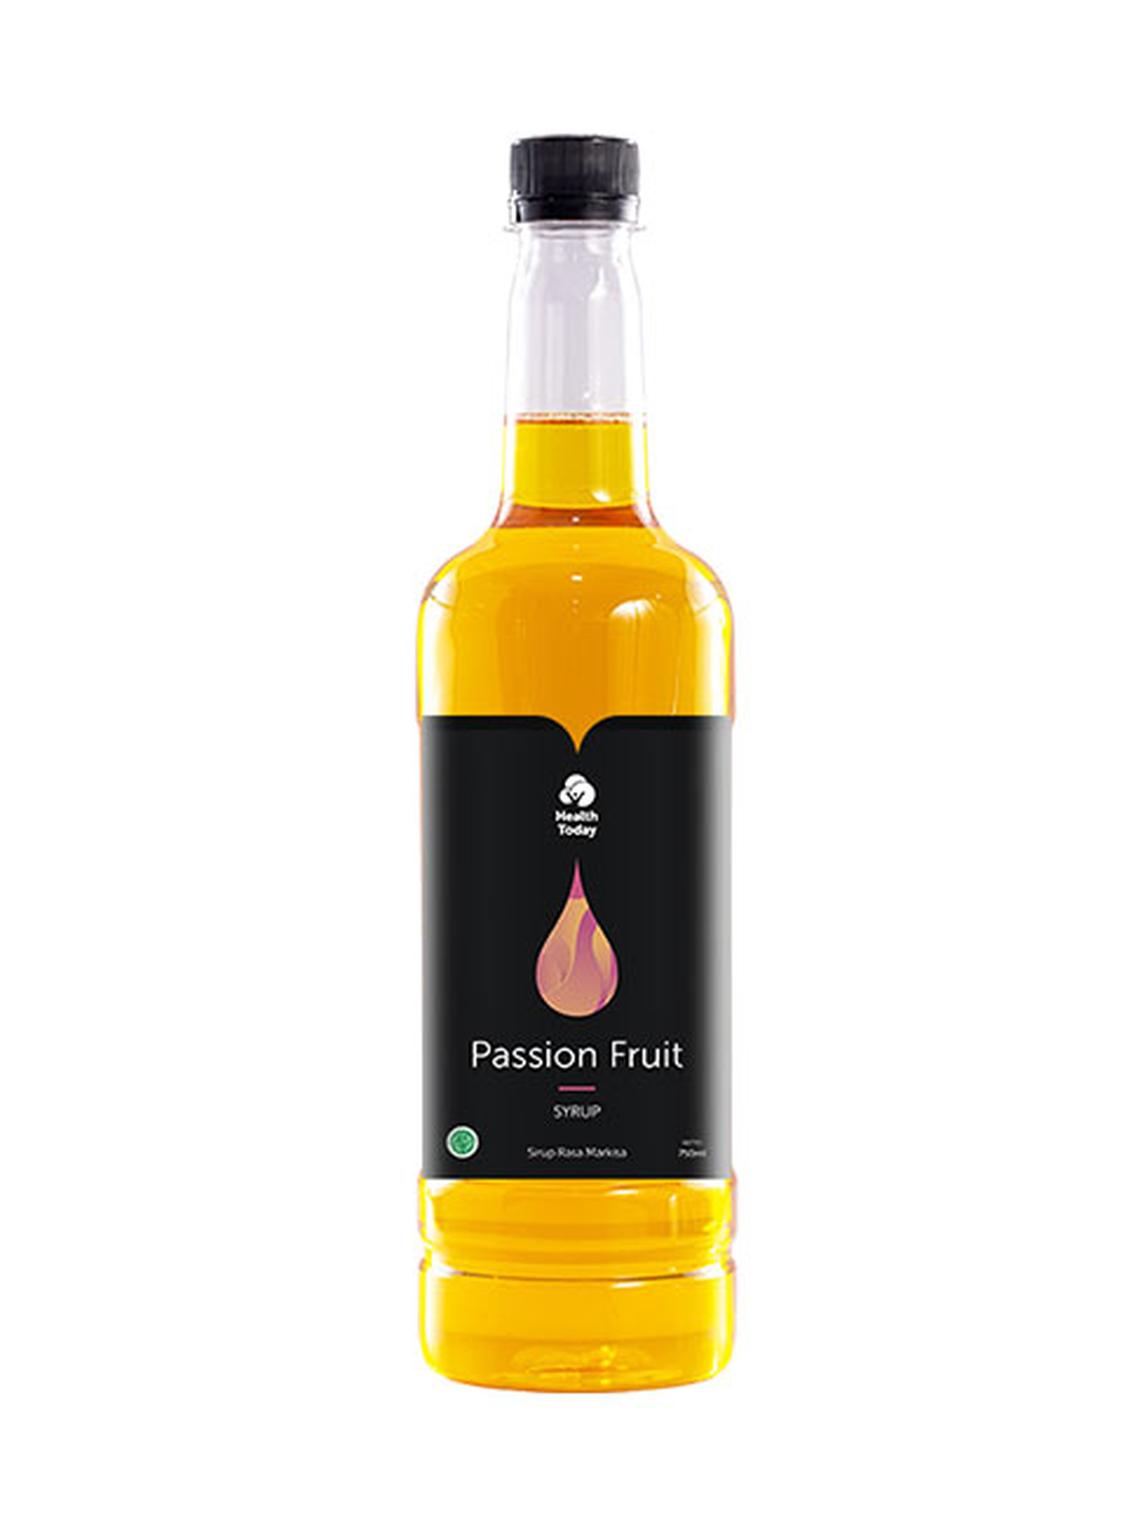 Health Today Syrup Passion Fruit 750 ml